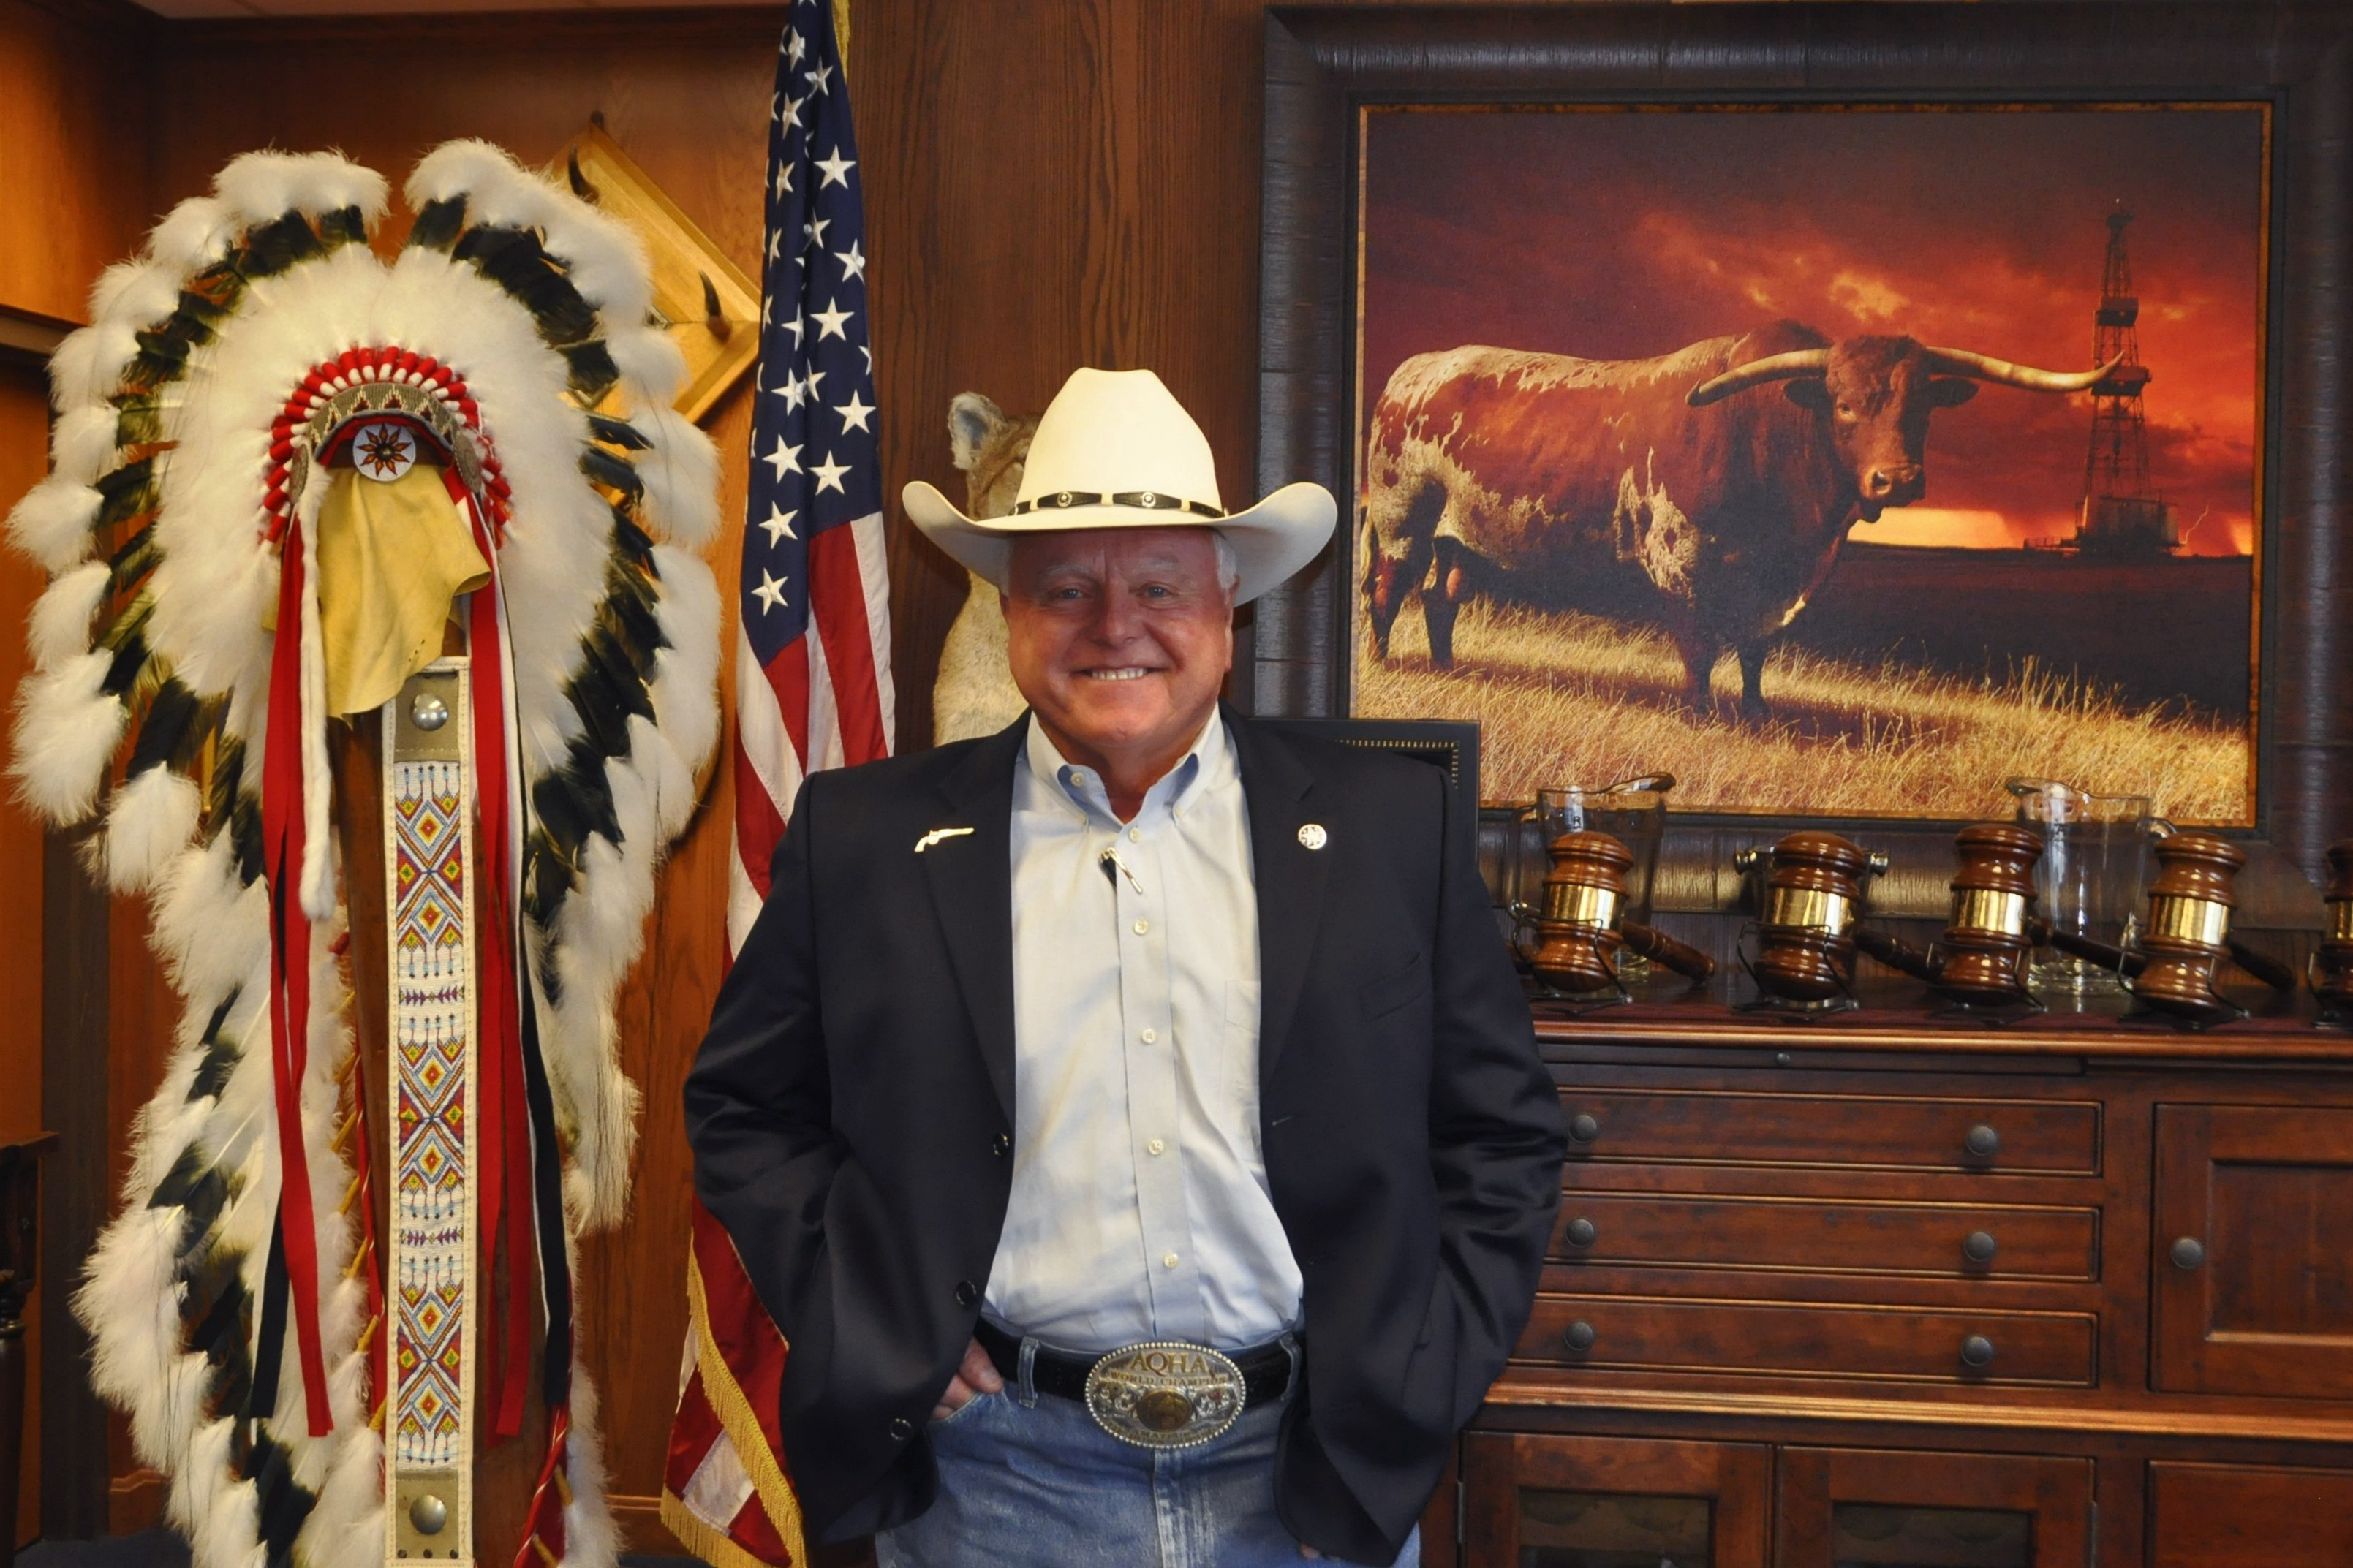 Texas Agriculture Commissioner Sid Miller stands in his office in Austin, Texas on Sept. 12, 2016. (Michael Donhauser/picture-alliance/AP)